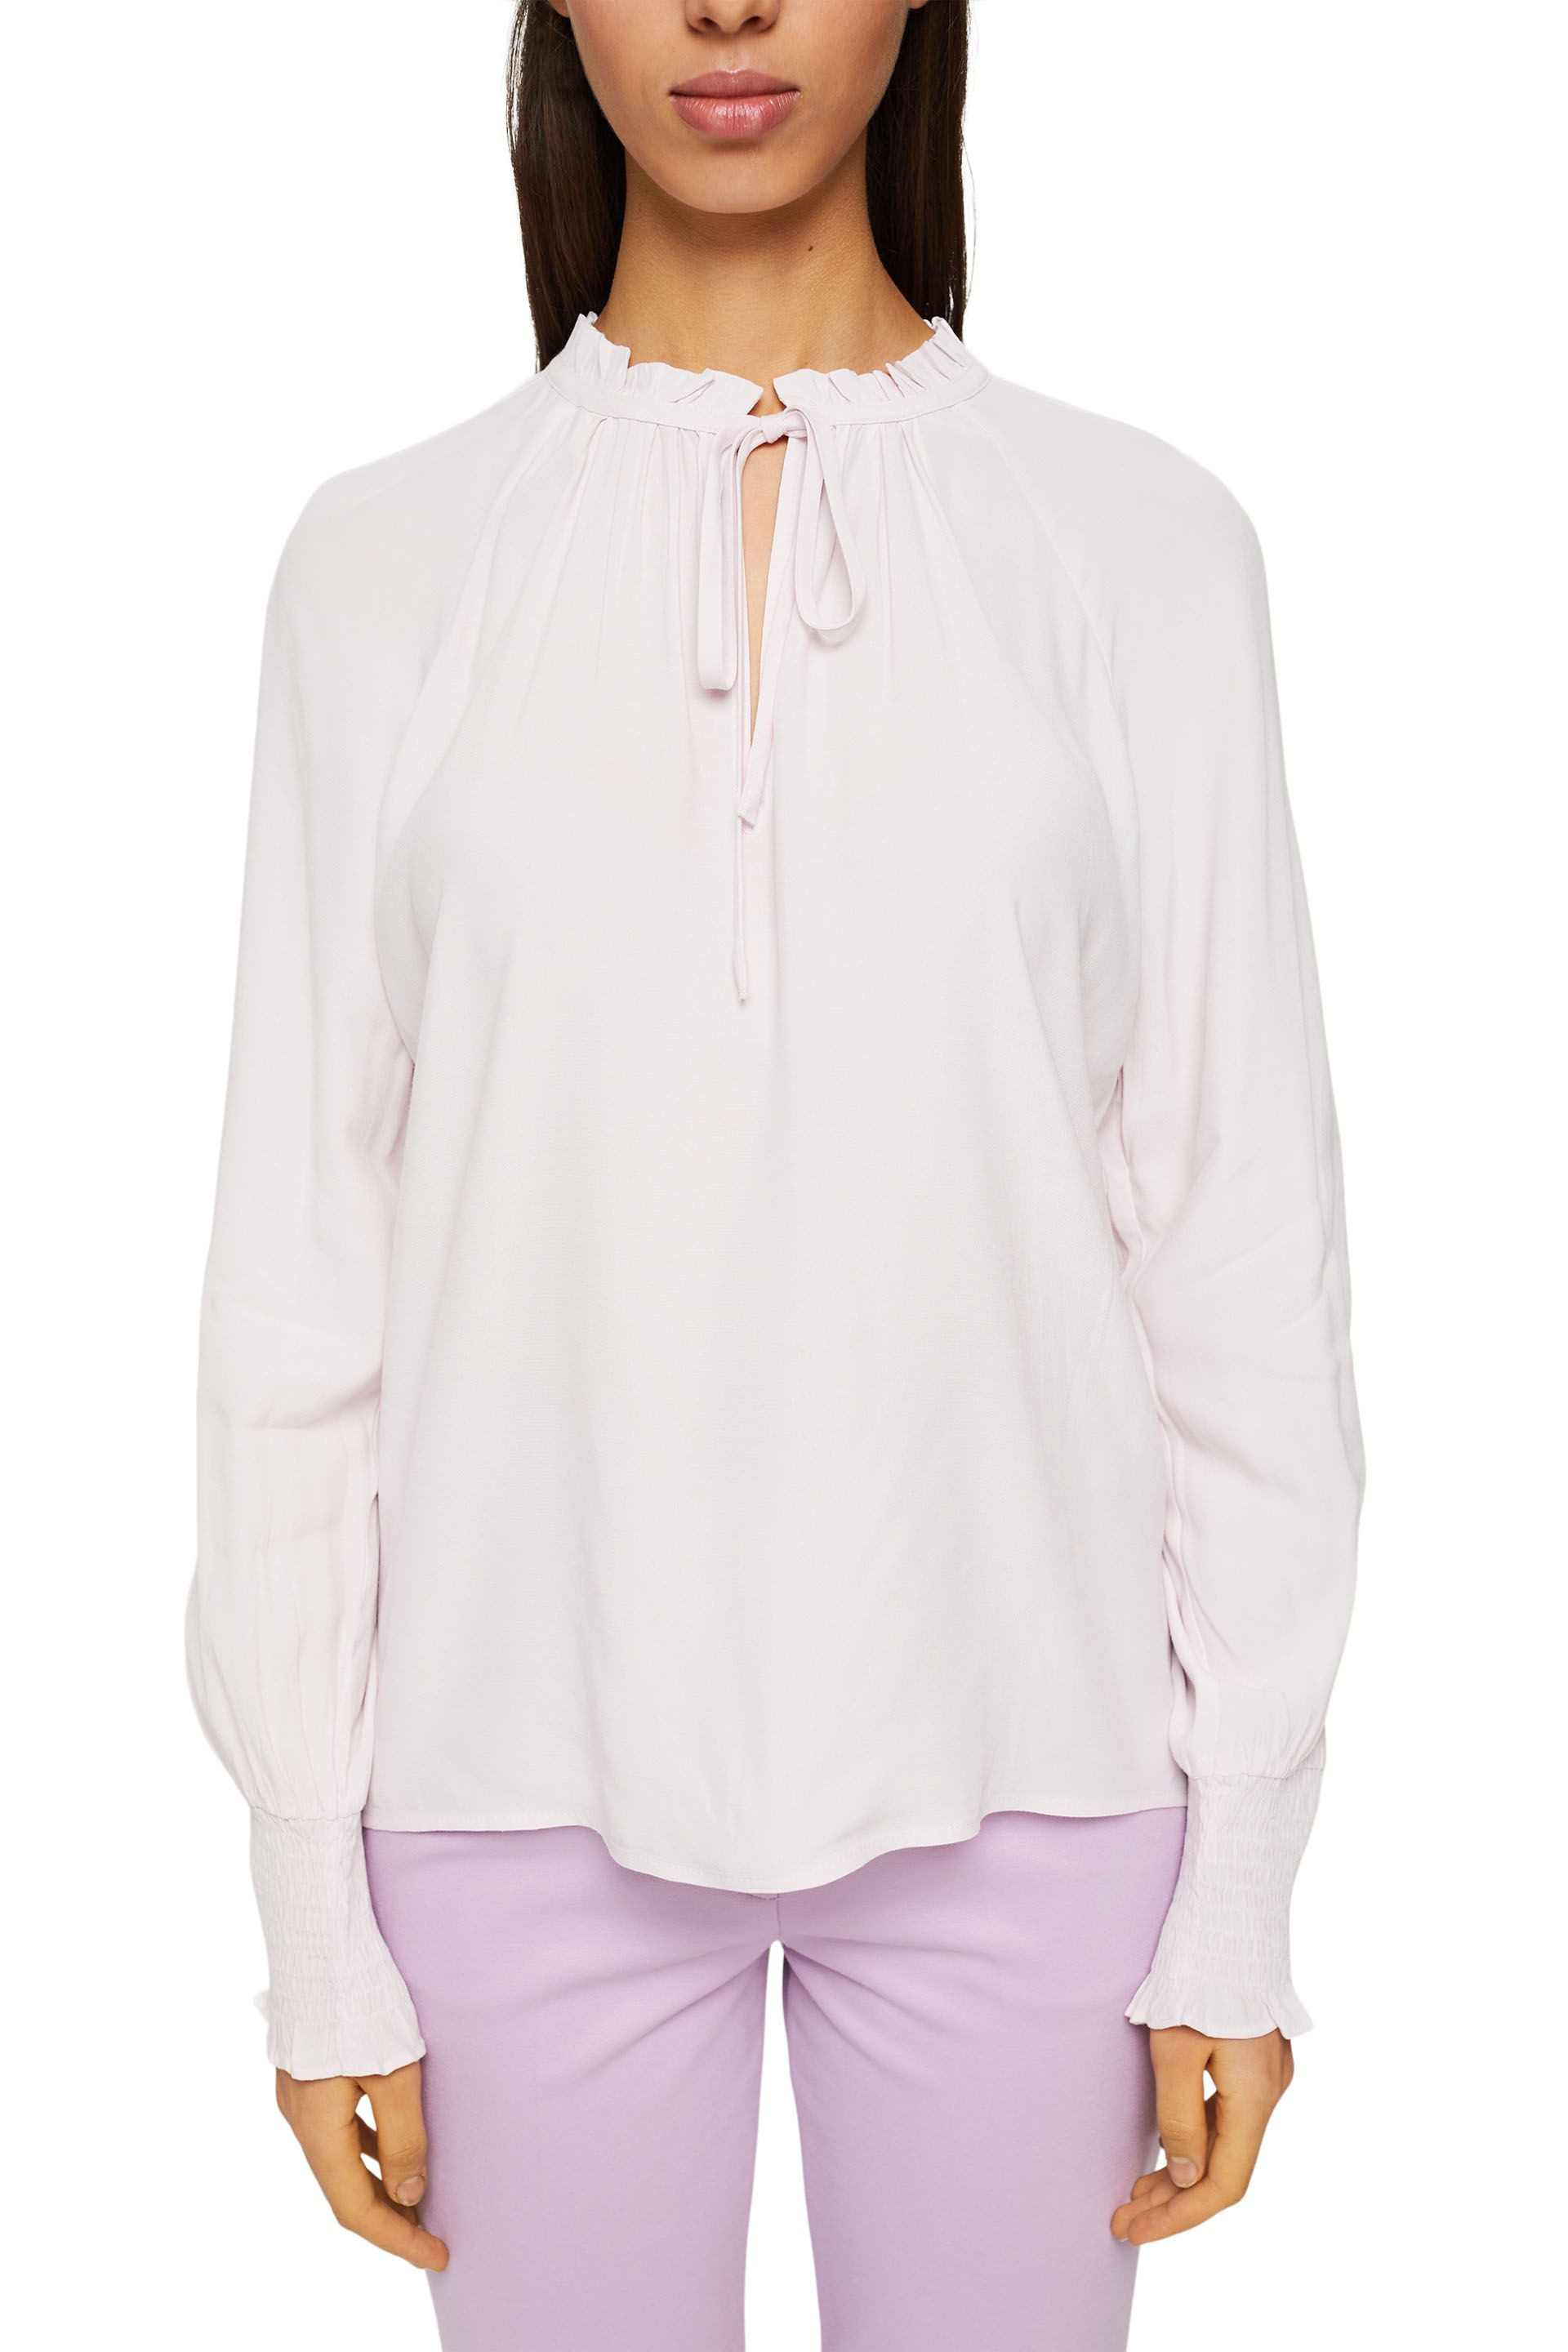 Shirt with ruffles and gathering, Light Pink, large image number 1